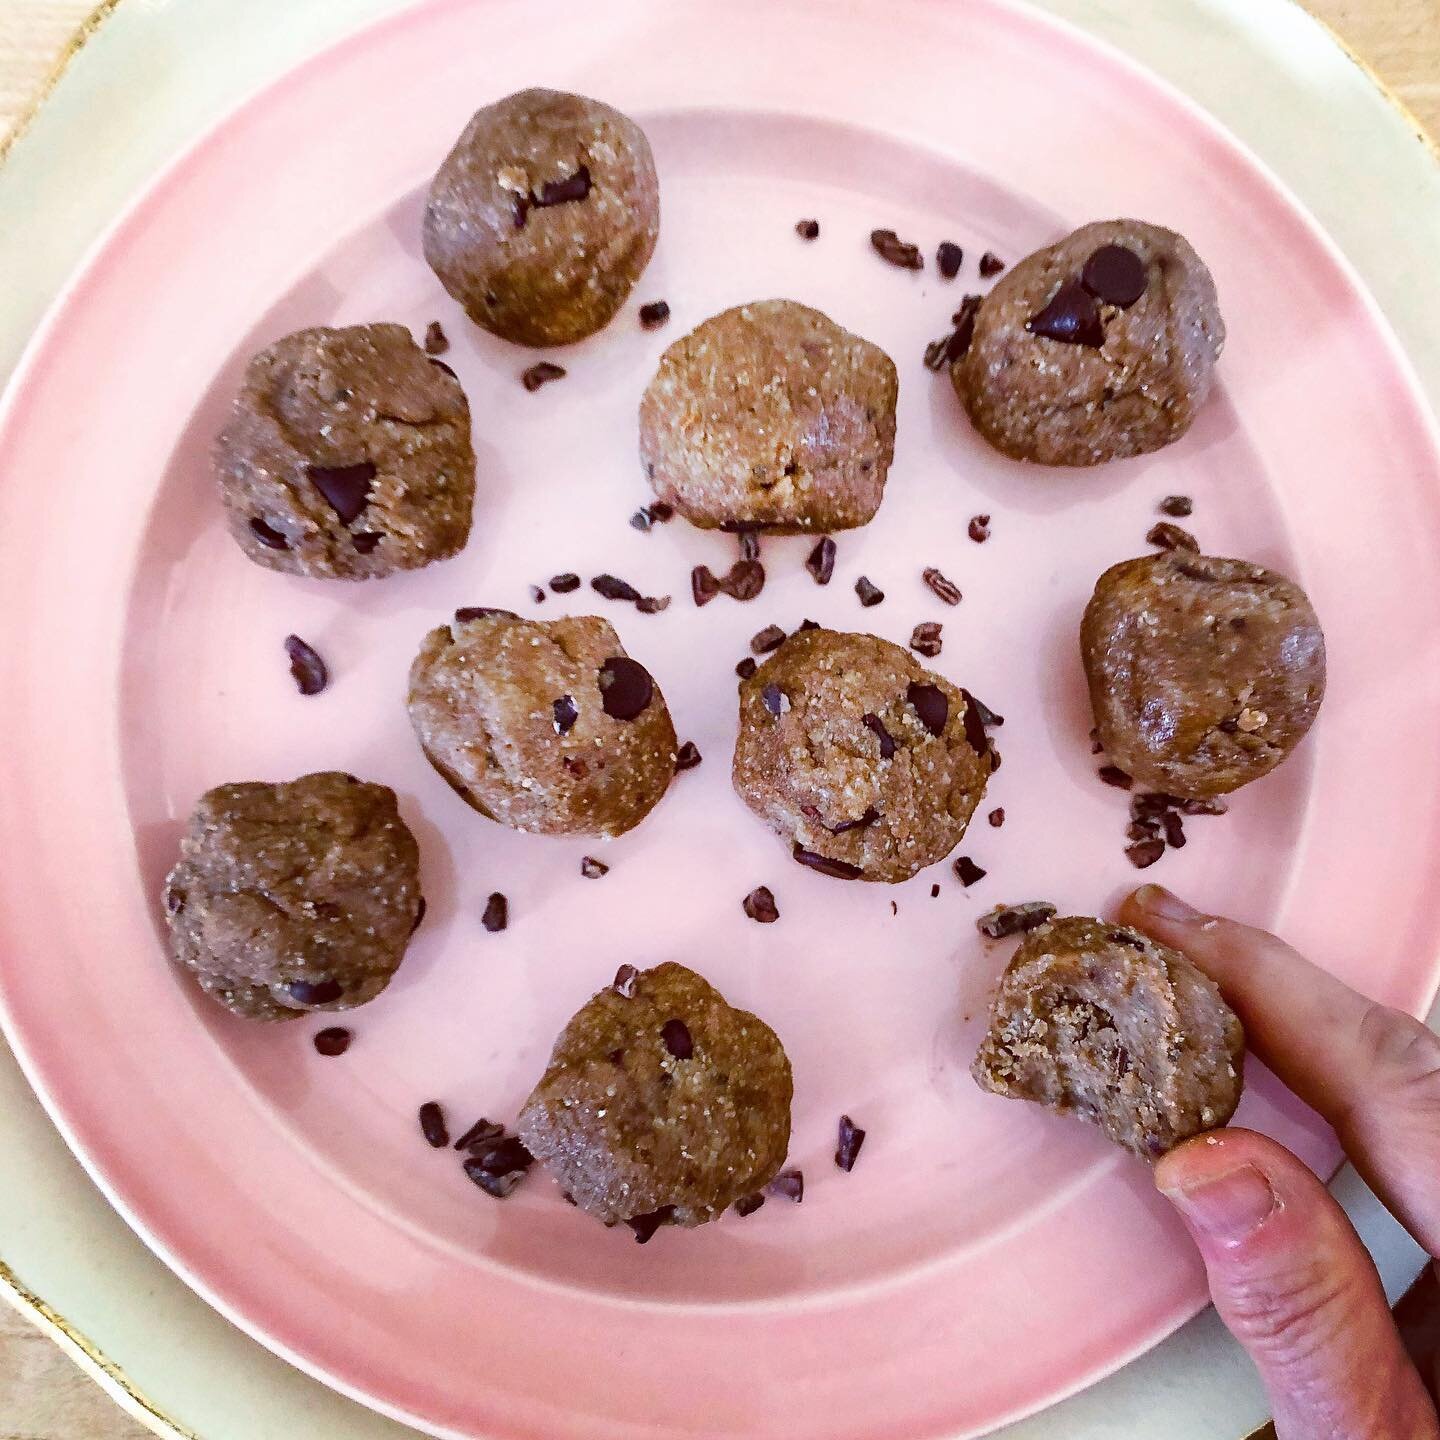 &ldquo;HEALTHIFIED&rdquo; TREATS! Just because I mostly avoid refined sugar doesn&rsquo;t mean I don&rsquo;t enjoy sweet treats. These Chocolate Chip Collagen Cookie Dough Balls are delicious, super easy to make and are actually good for you. 🙌🏻The